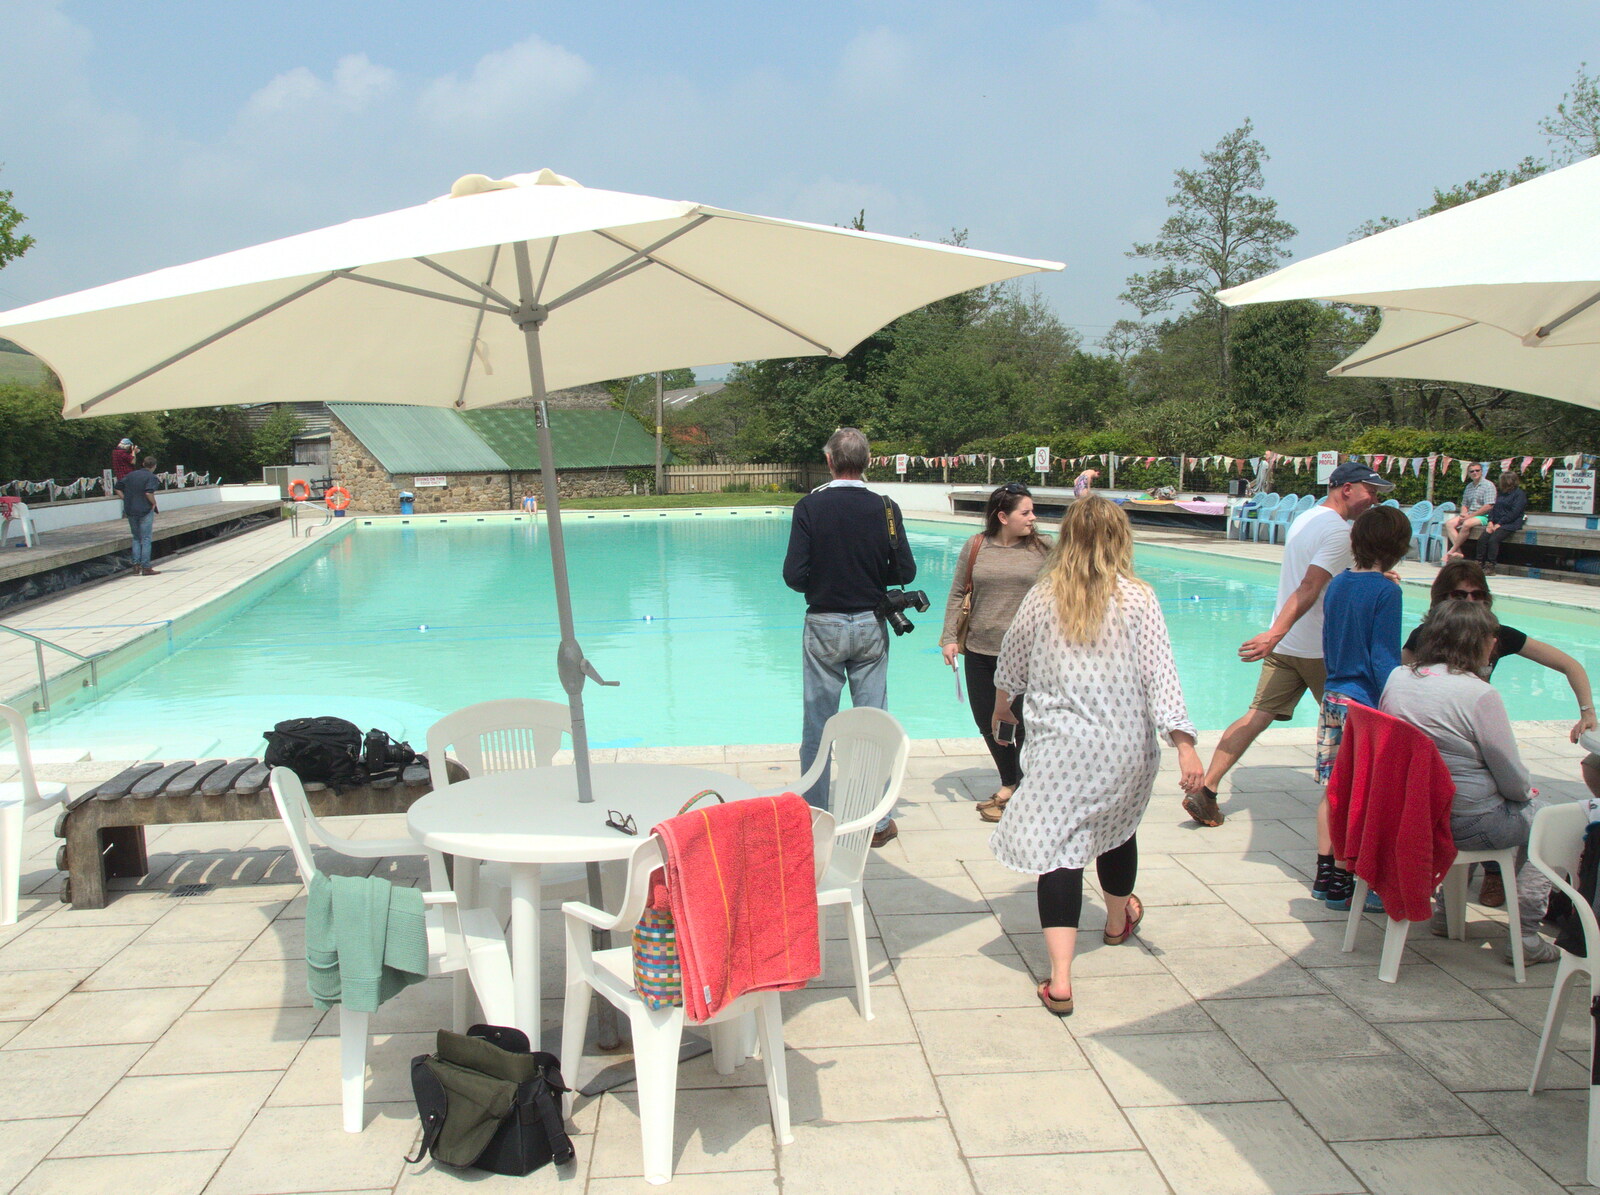 It's almost like the Bahamas or something from The Grand Re-opening of the Chagford Lido, Chagford, Devon - 28th May 2016